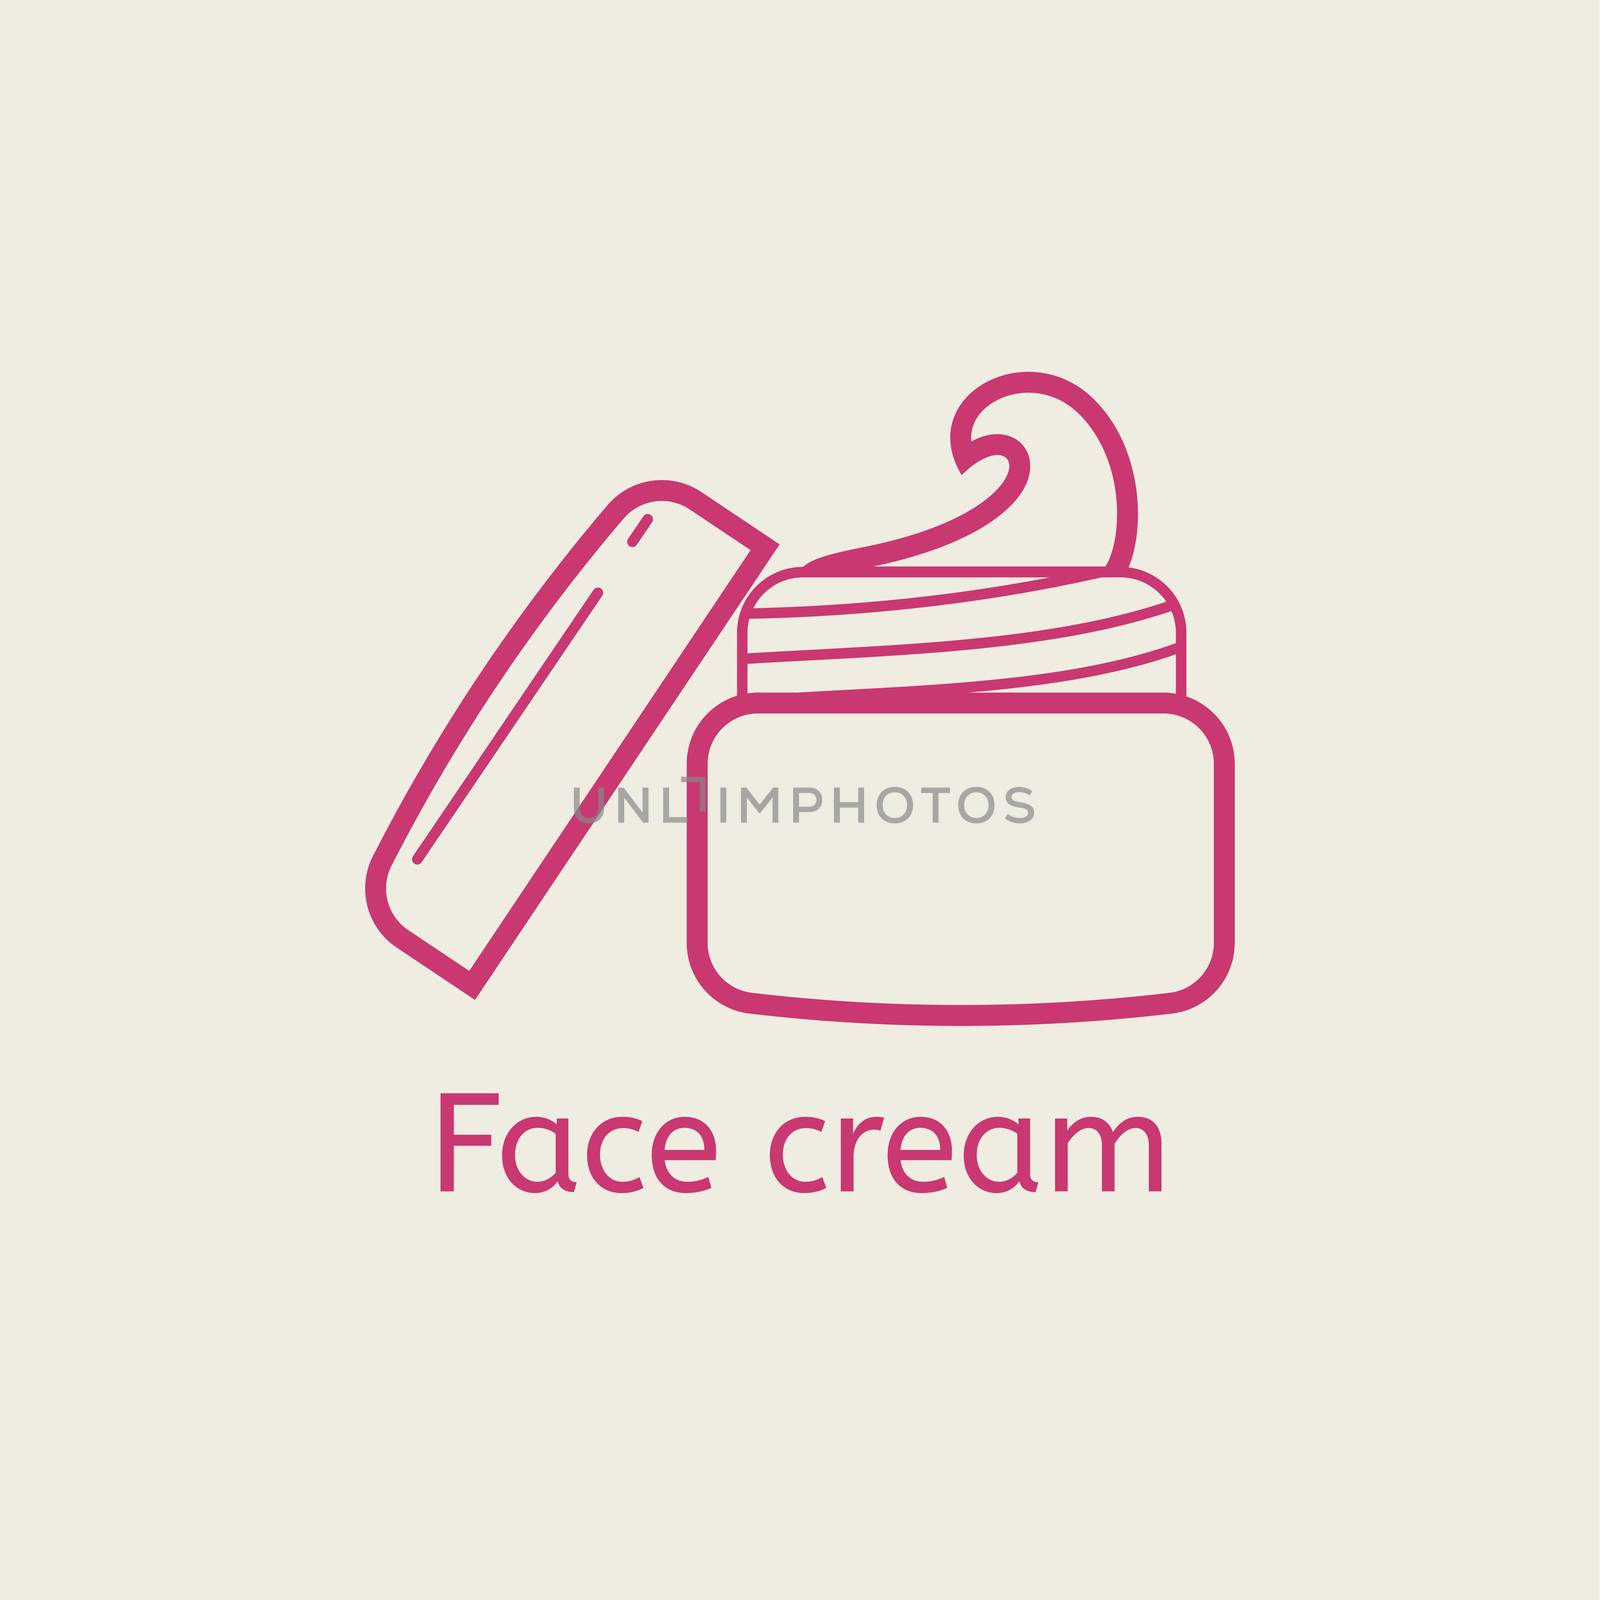 Face cream line icon. thin linear signs for makeup and visage. Cosmetic for underlining the eyes.